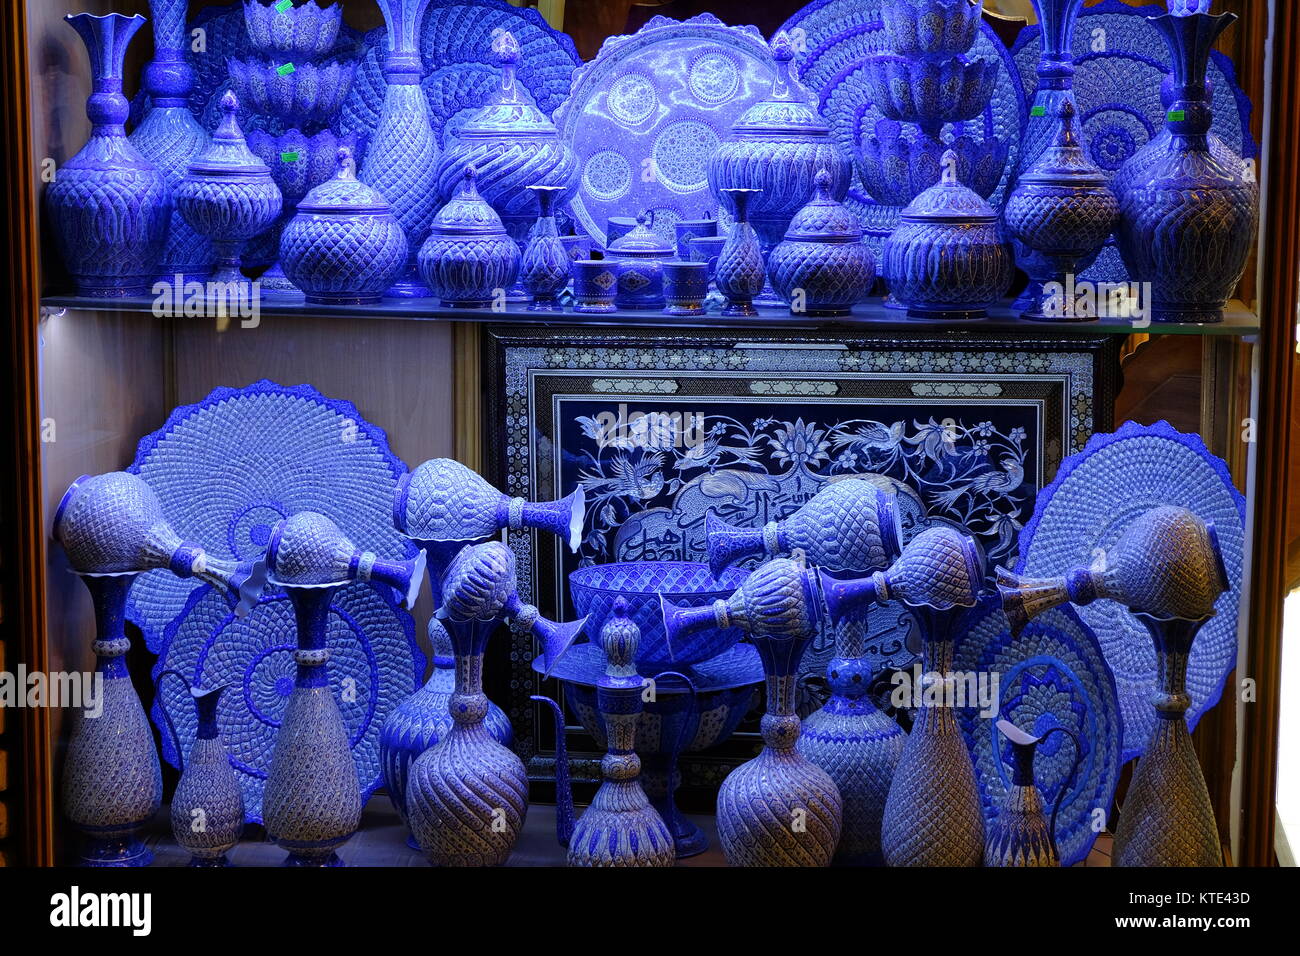 The Art of Minakari with the azure blue enamelling is a unique craft from Isfahan. Iran Stock Photo